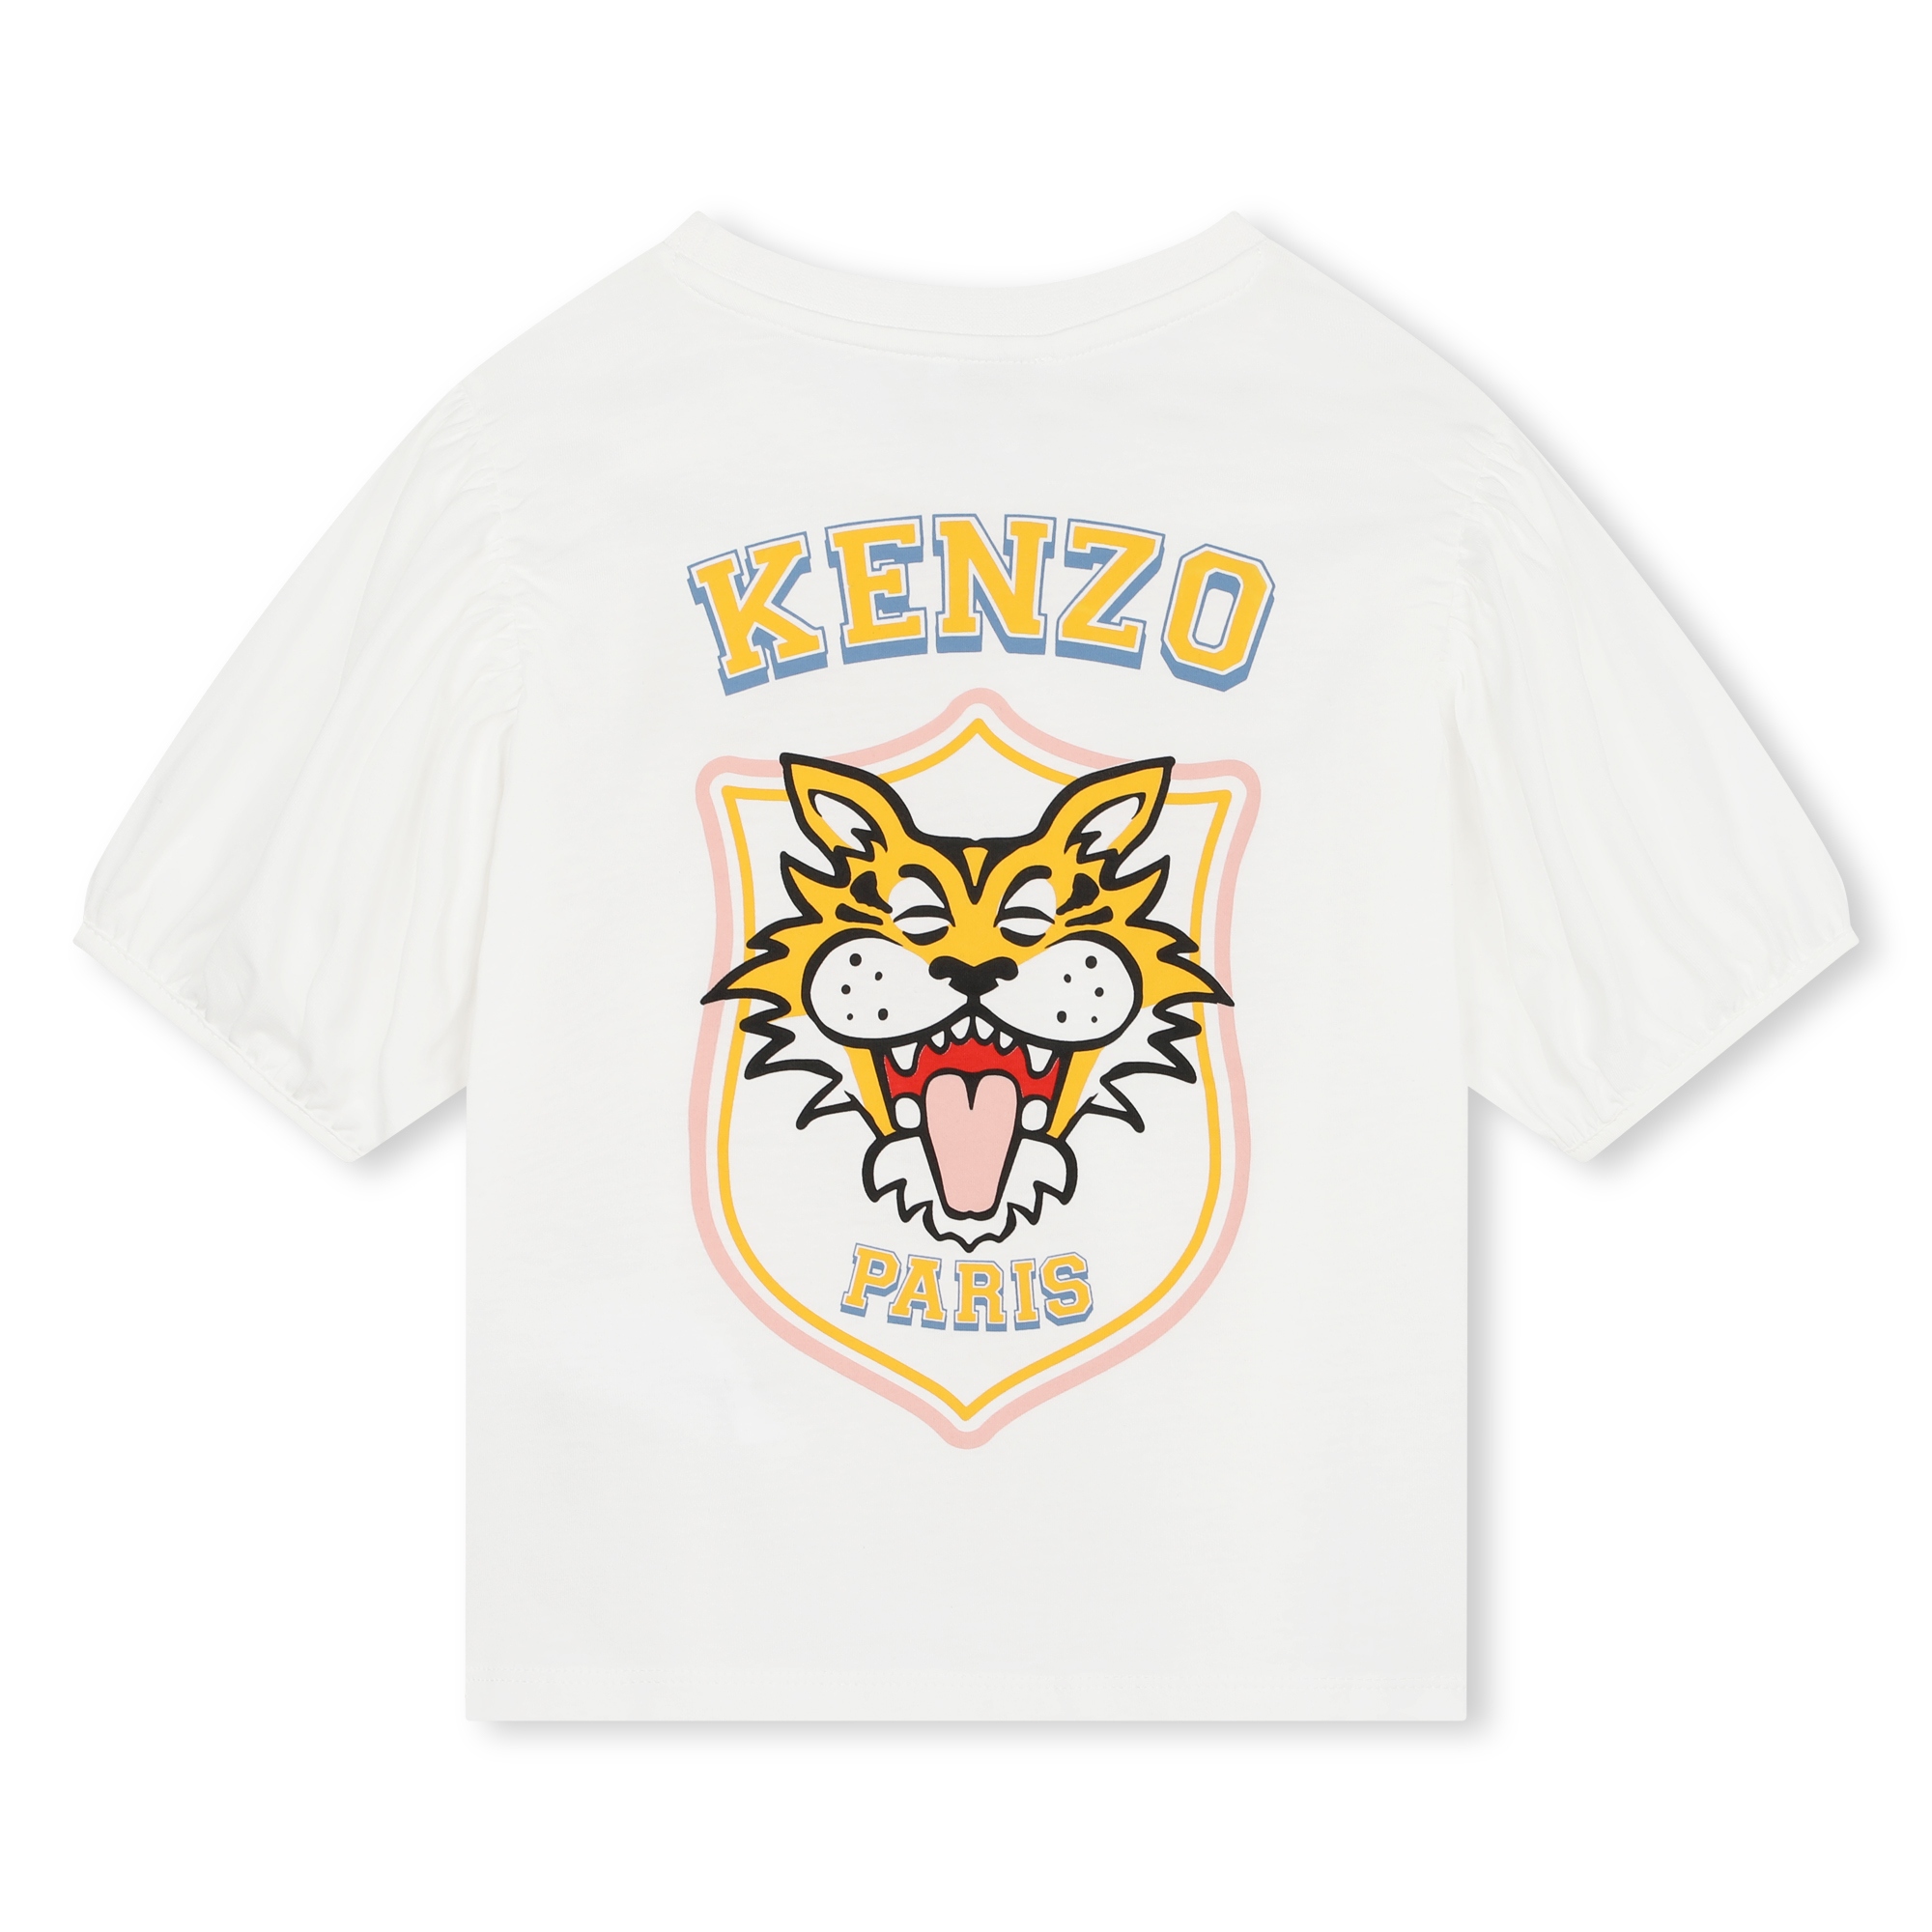 T-shirt with balloon sleeves KENZO KIDS for GIRL